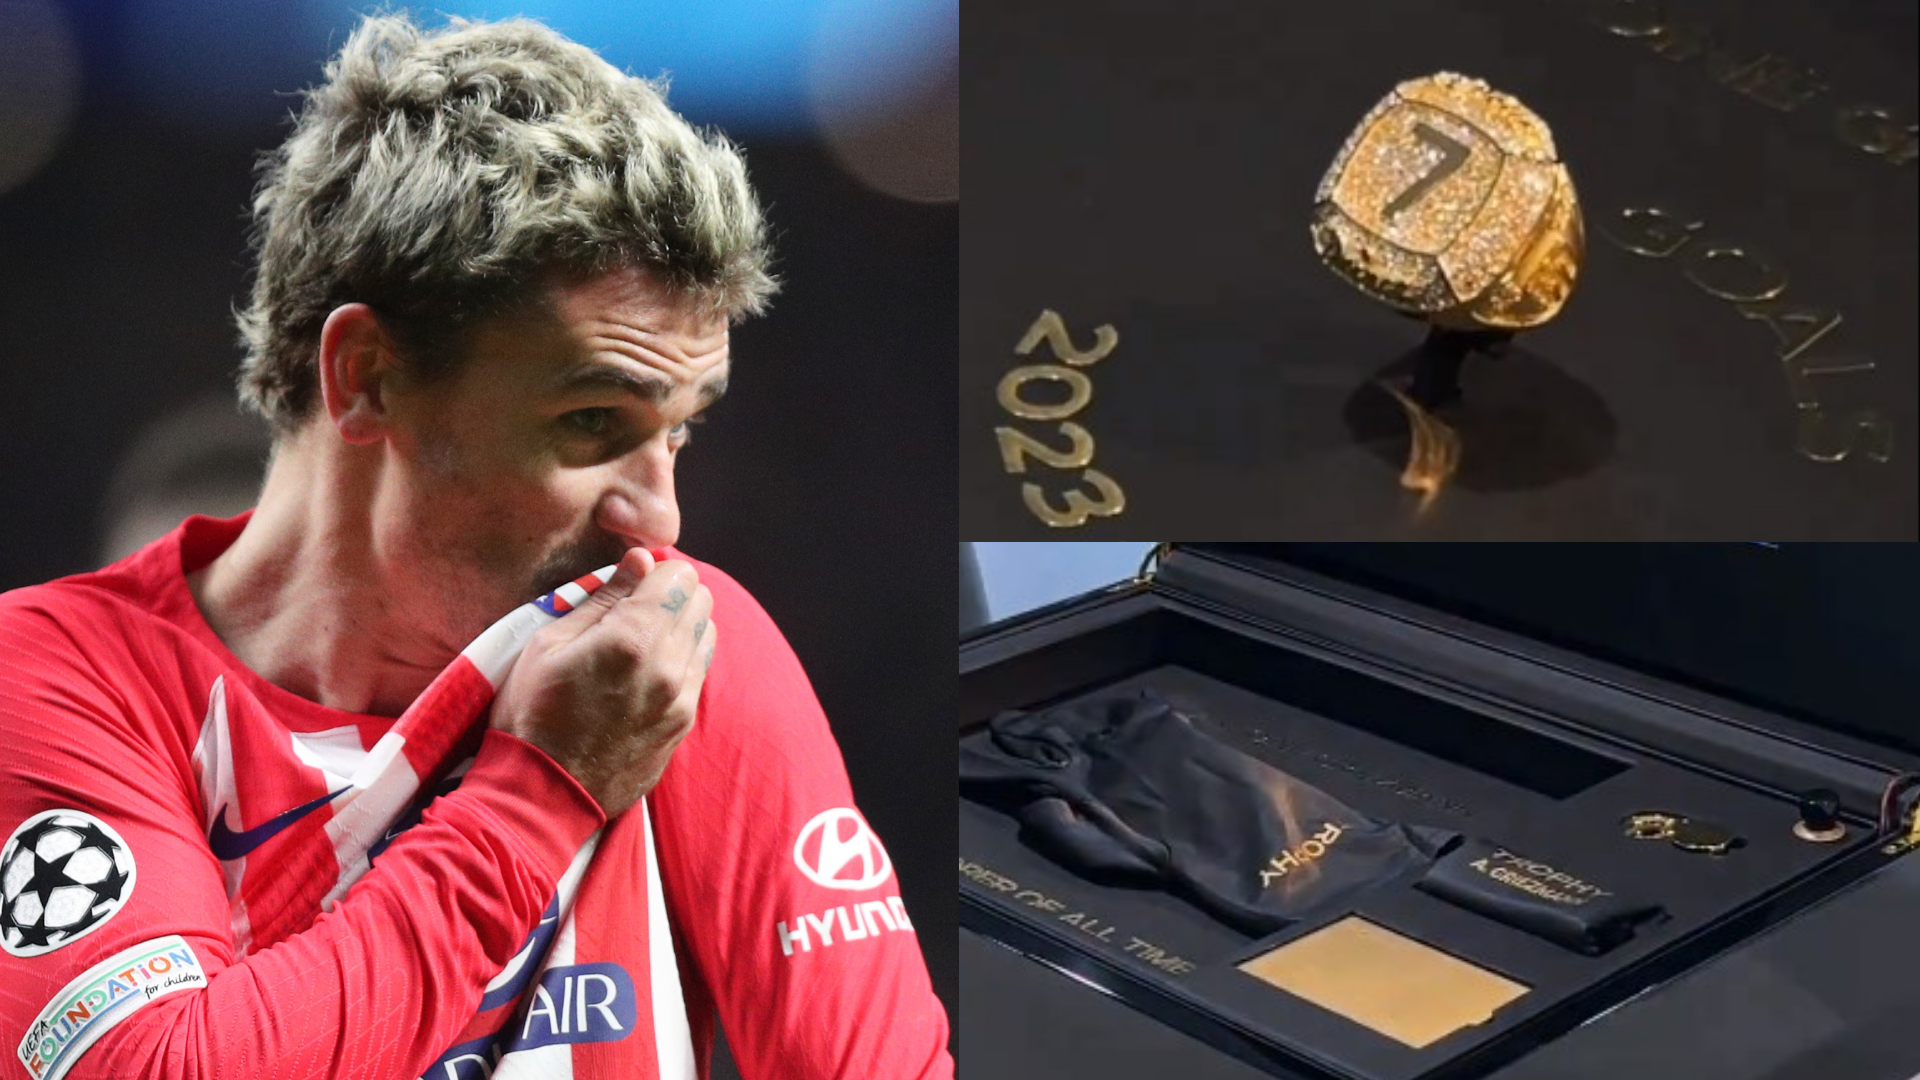 video-going-to-cry-memphis-depay-gifts-diamond-encrusted-nba-esque-ring-to-antoine-griezmann-on-valentine-s-day-after-reaching-incredible-atletico-madrid-landmark-that-may-never-be-matched-or-goal-com-india